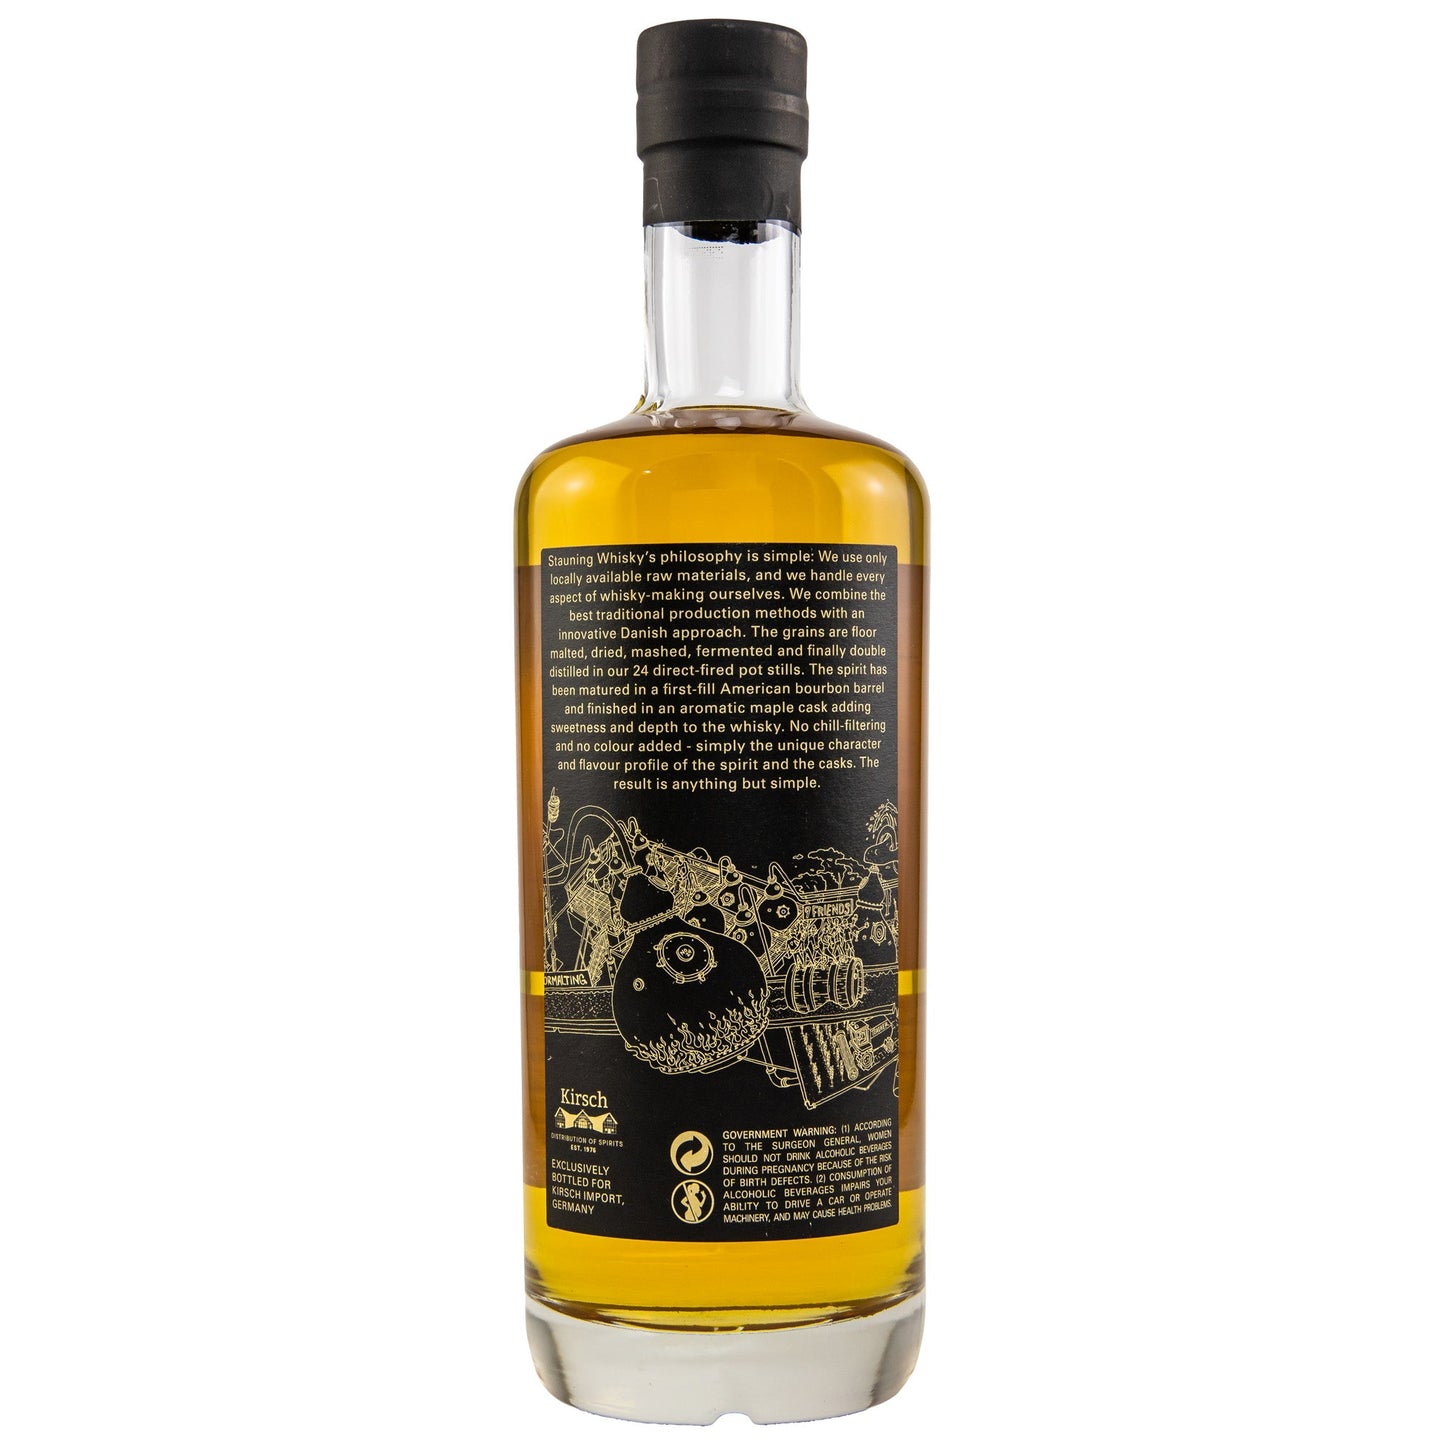 Stauning | 5 Jahre | 2017/2022 | Barley | Maple Syrup Cask #8400 | Danish Whisky | 0,7l | 57,6%GET A BOTTLE